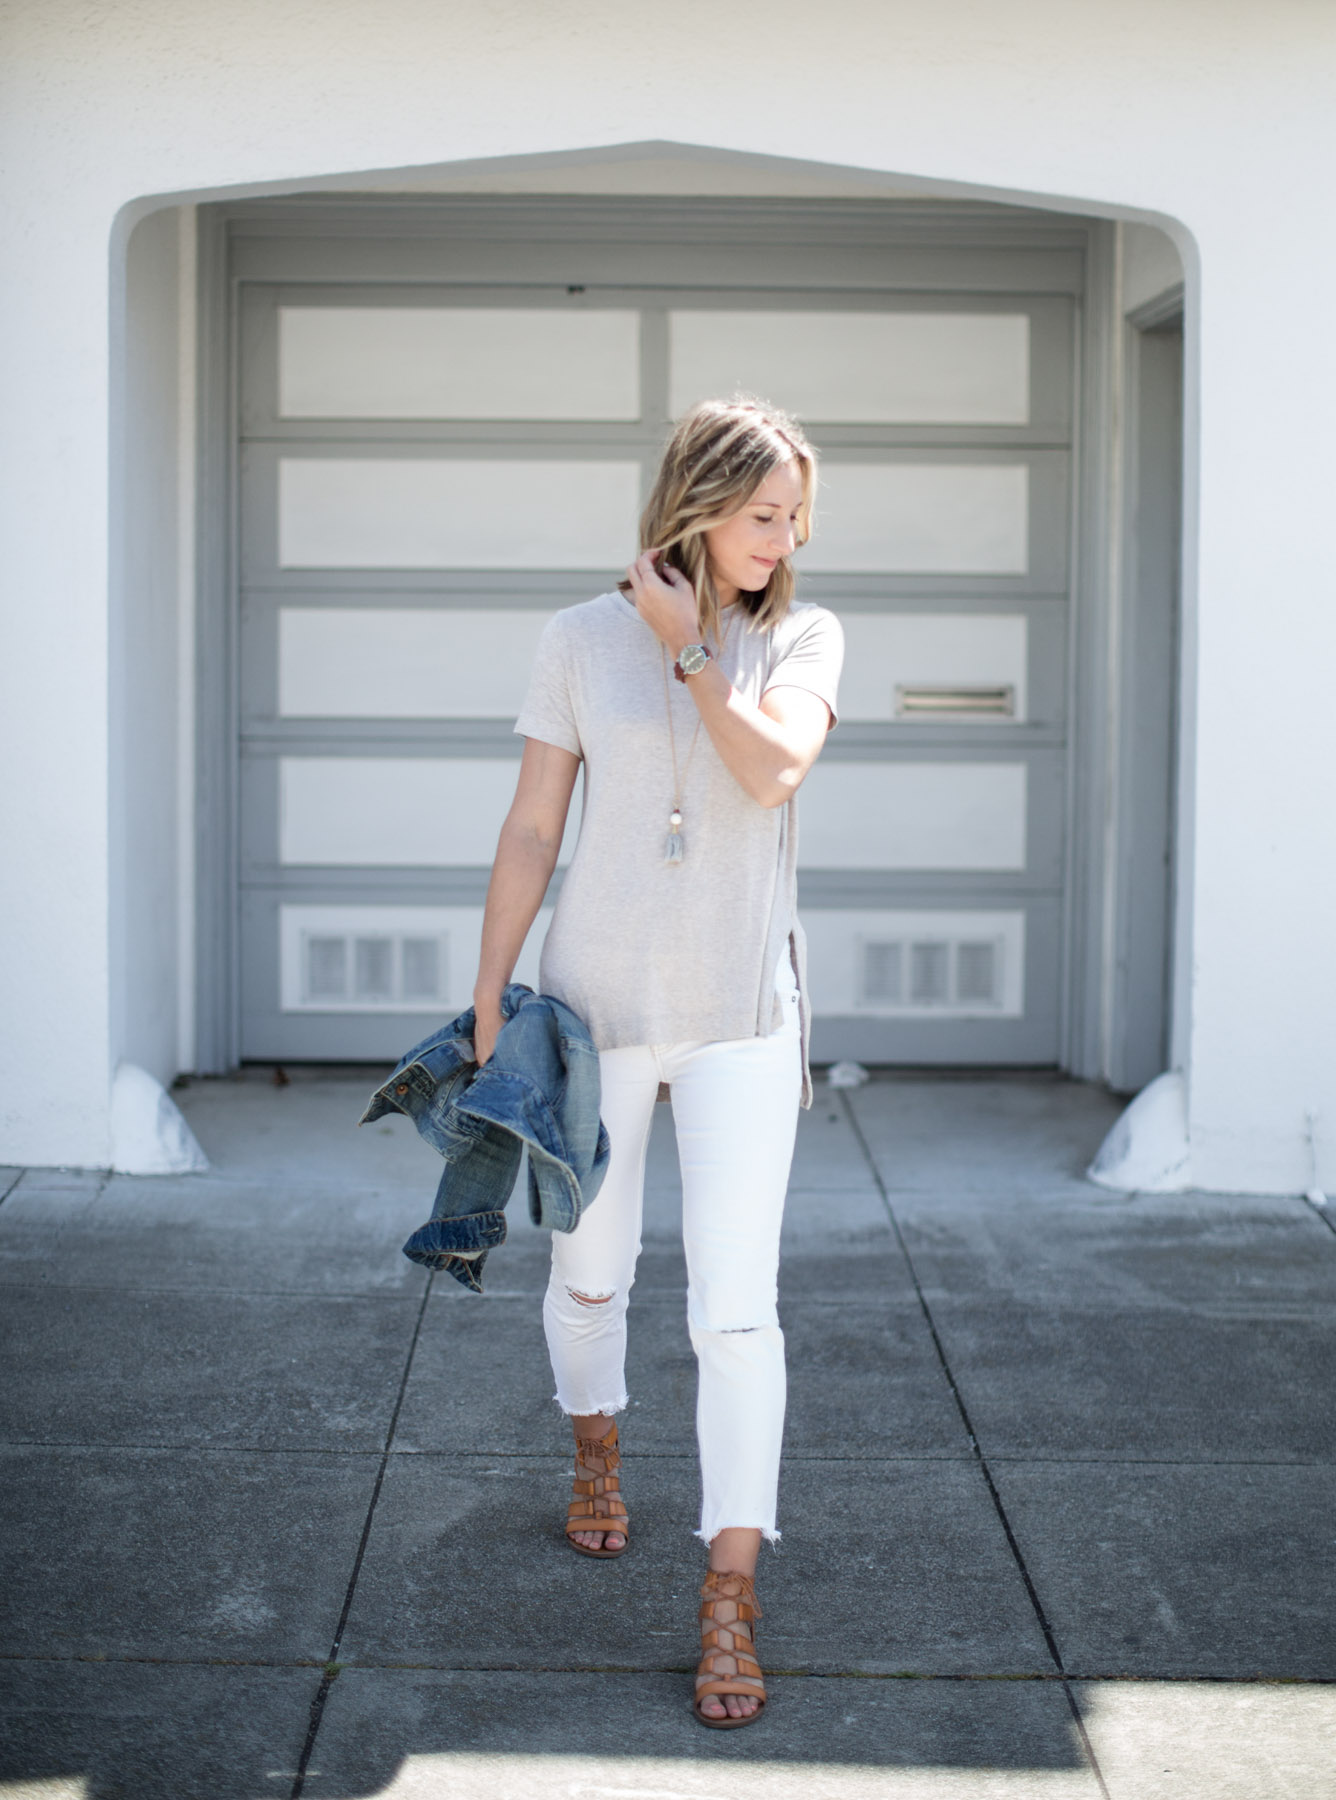 basic outfits with white jeans and tee shirt